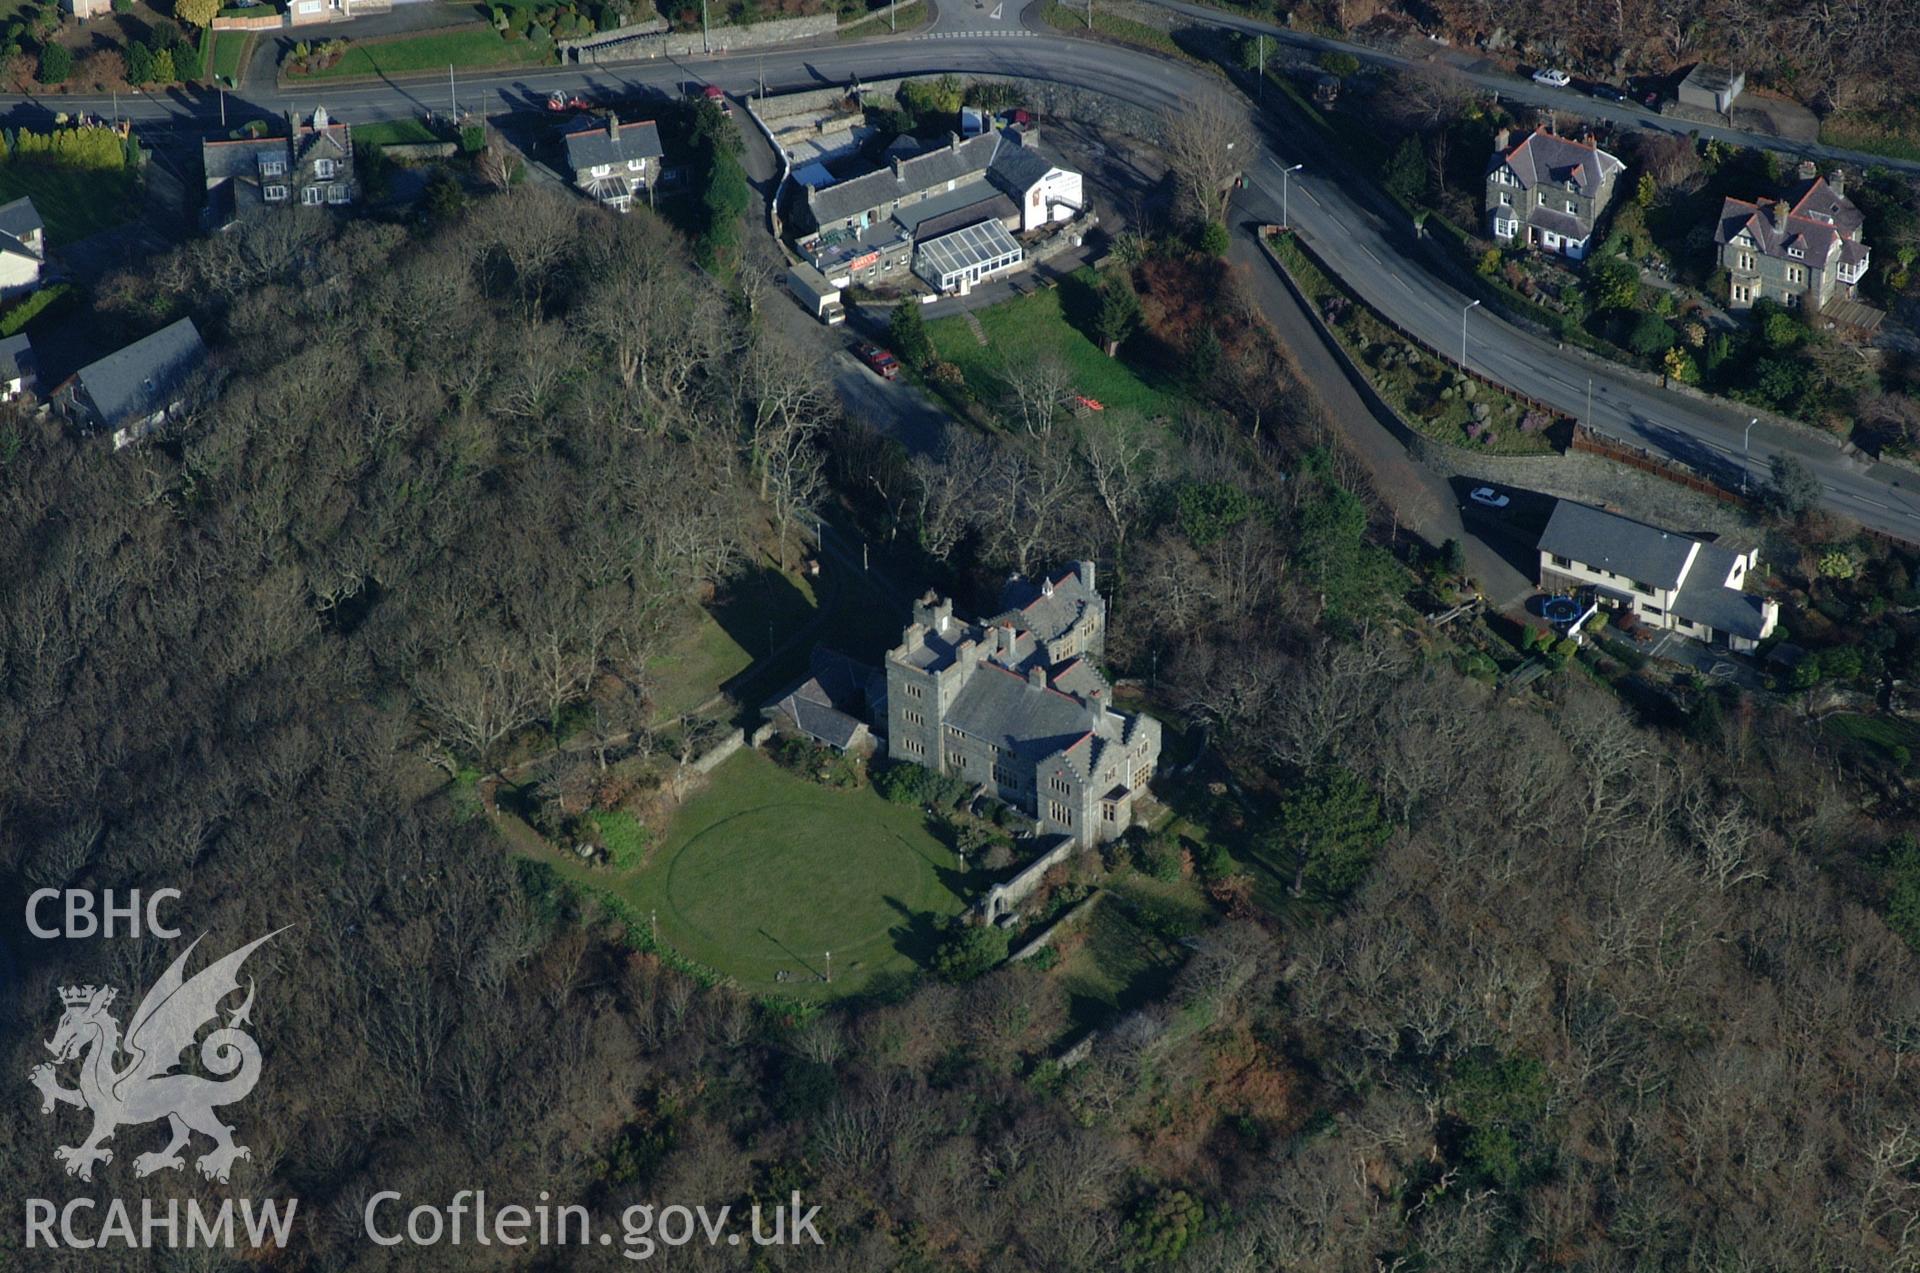 RCAHMW colour oblique aerial photograph of Plas Mynach taken on 24/01/2005 by Toby Driver